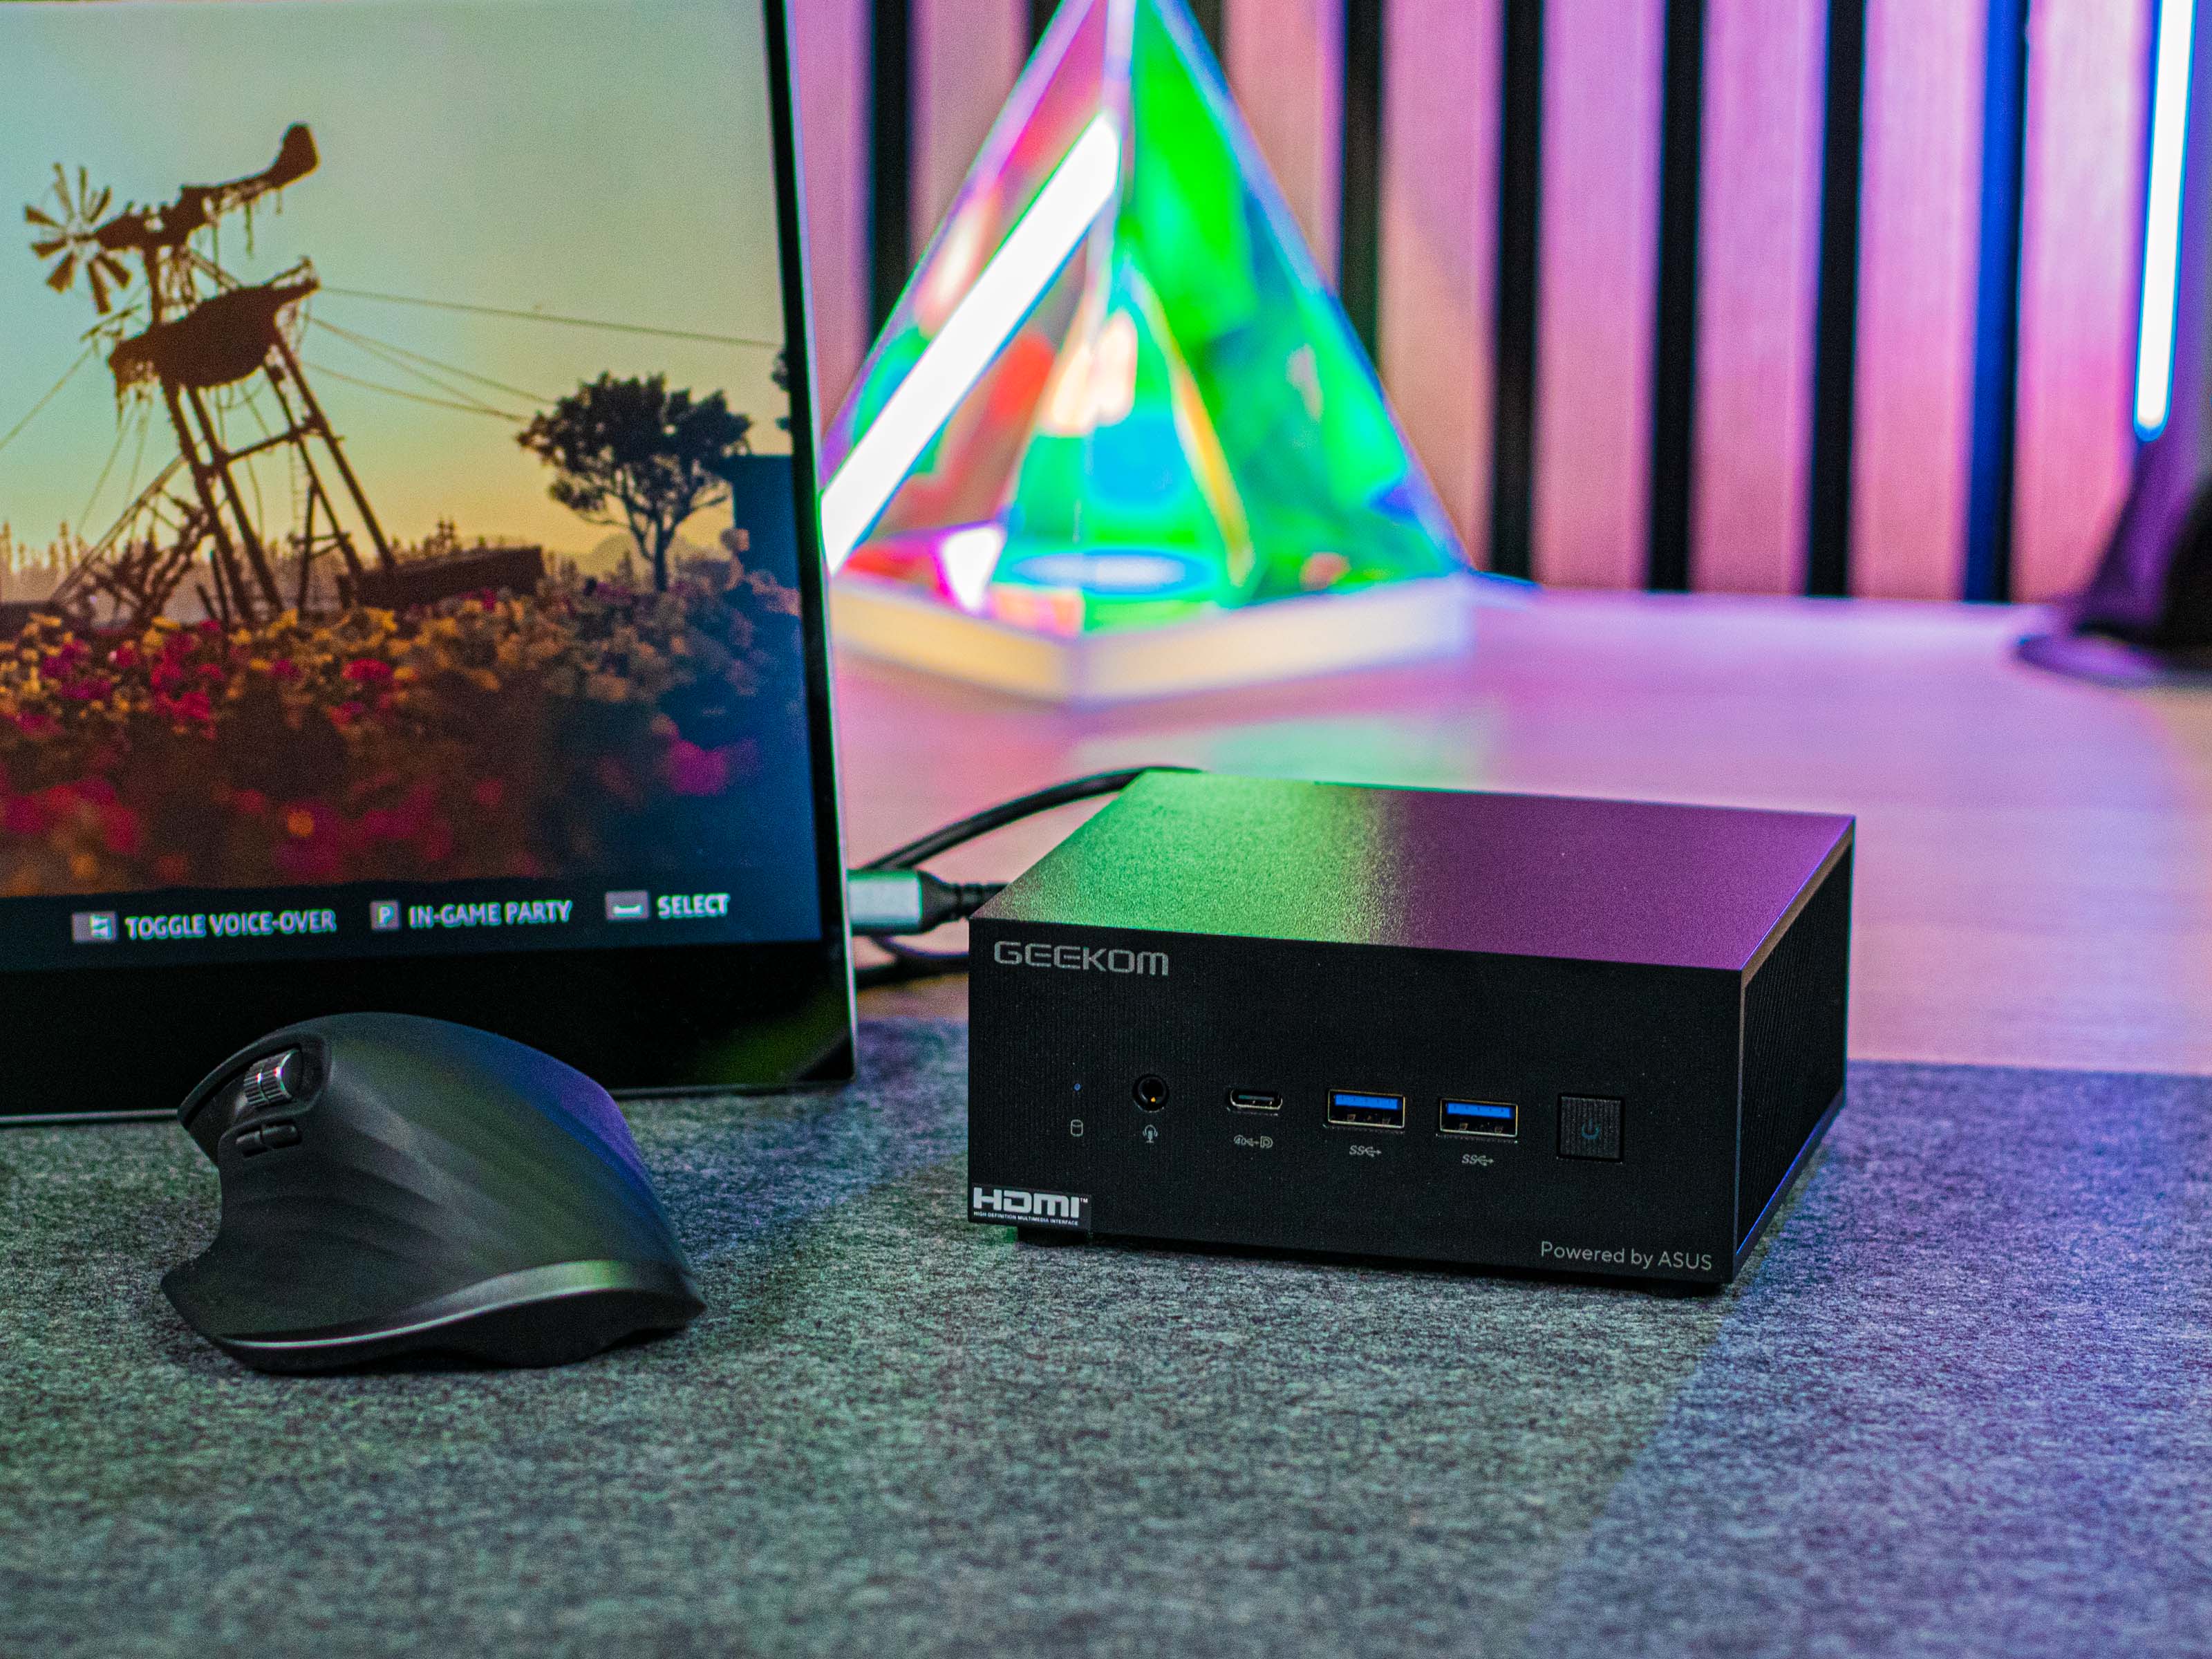 Geekom Mini IT 12 Review: The Perfect $500 Home Office PC?